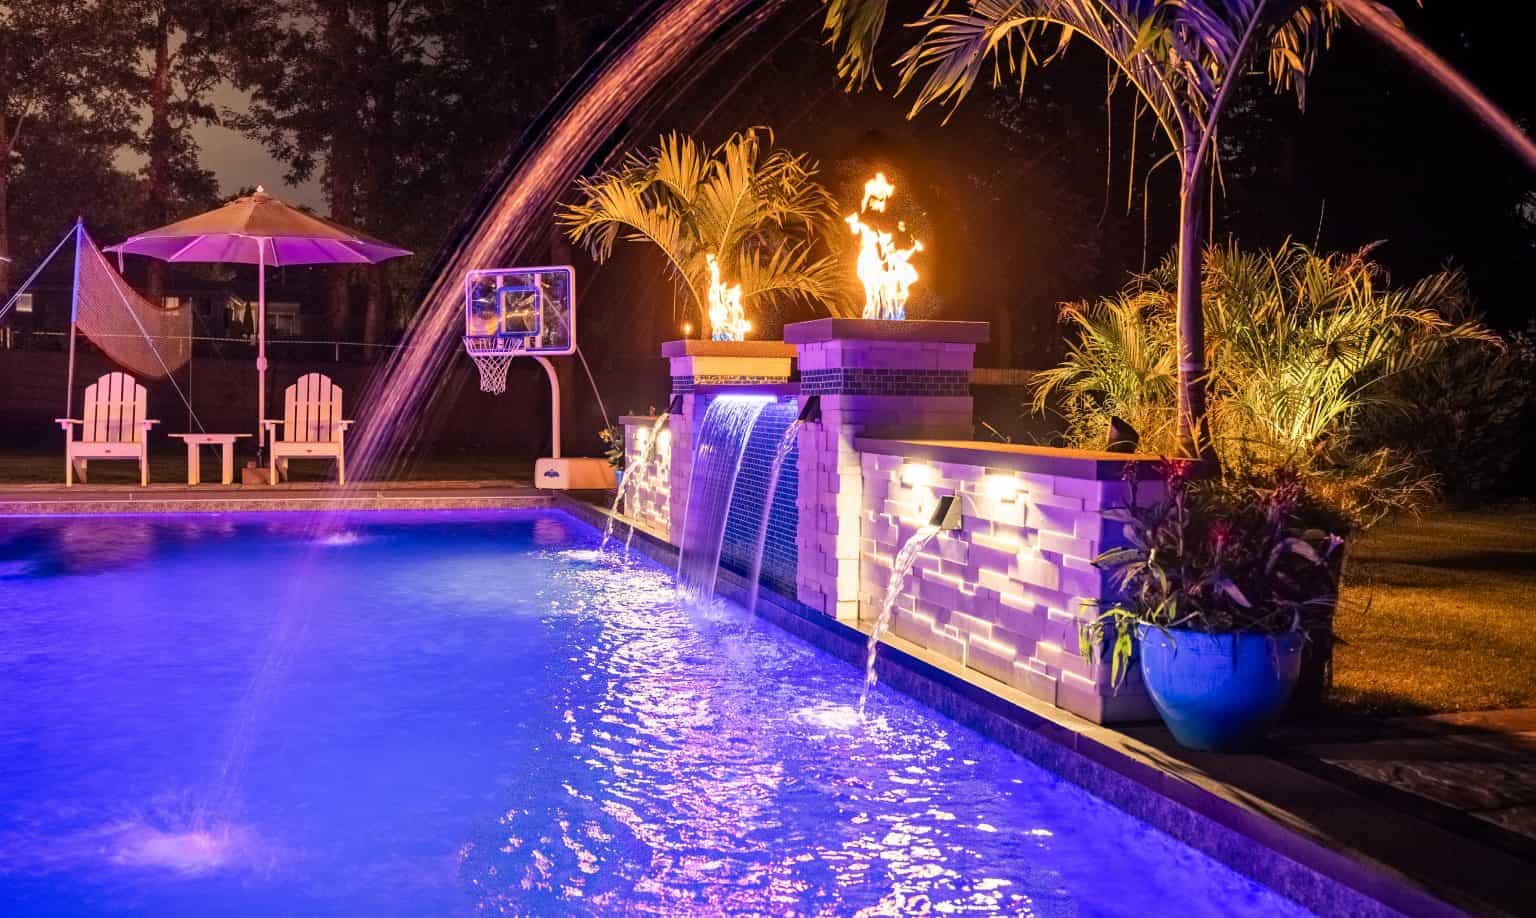 pool at night time with waterfall feature.